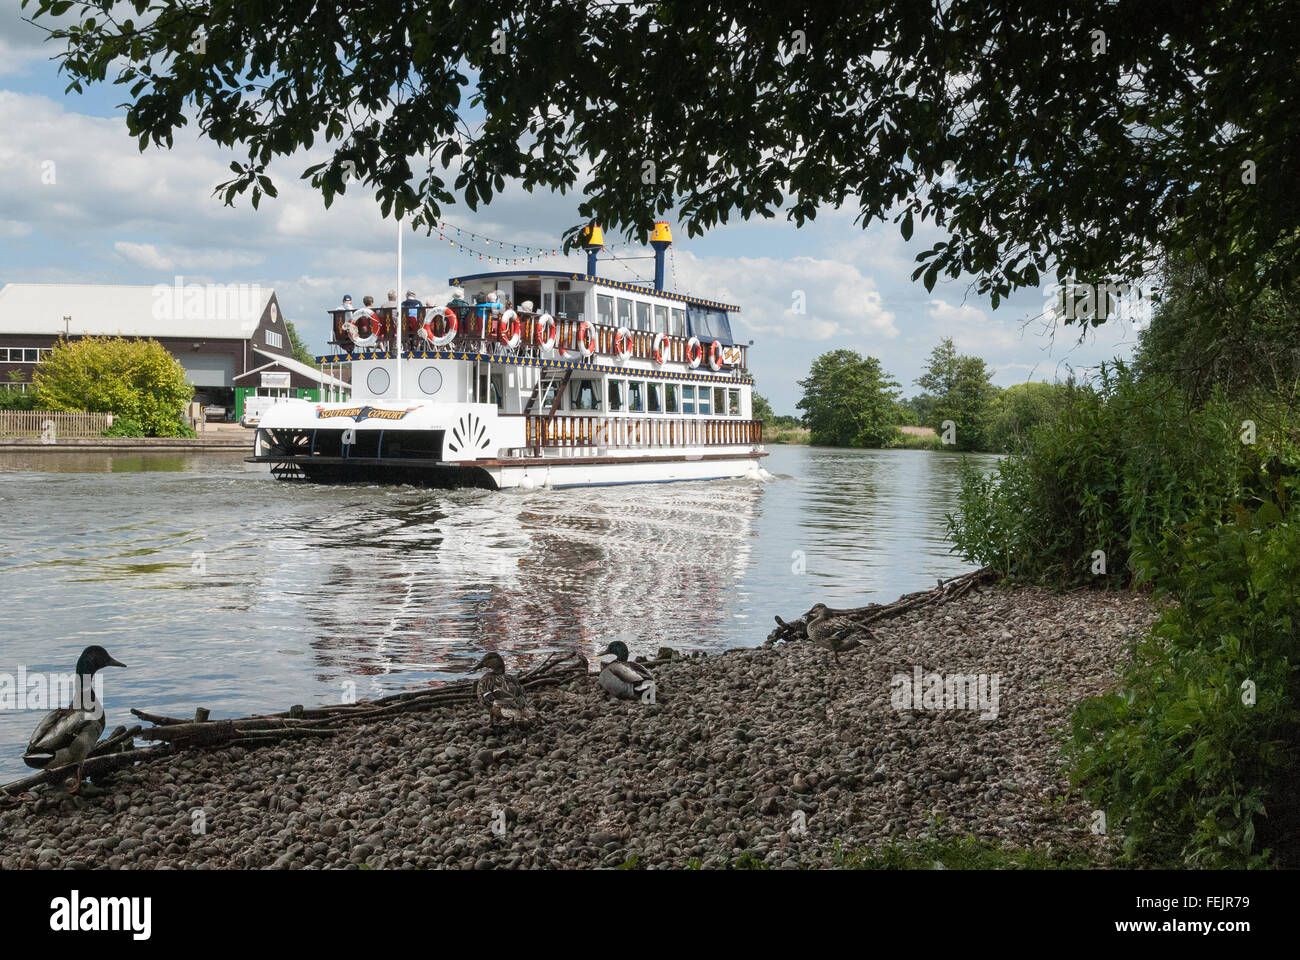 Steamboat on the River Yare, The Broads, Norfolk, Norwich, U.K. Stock Photo